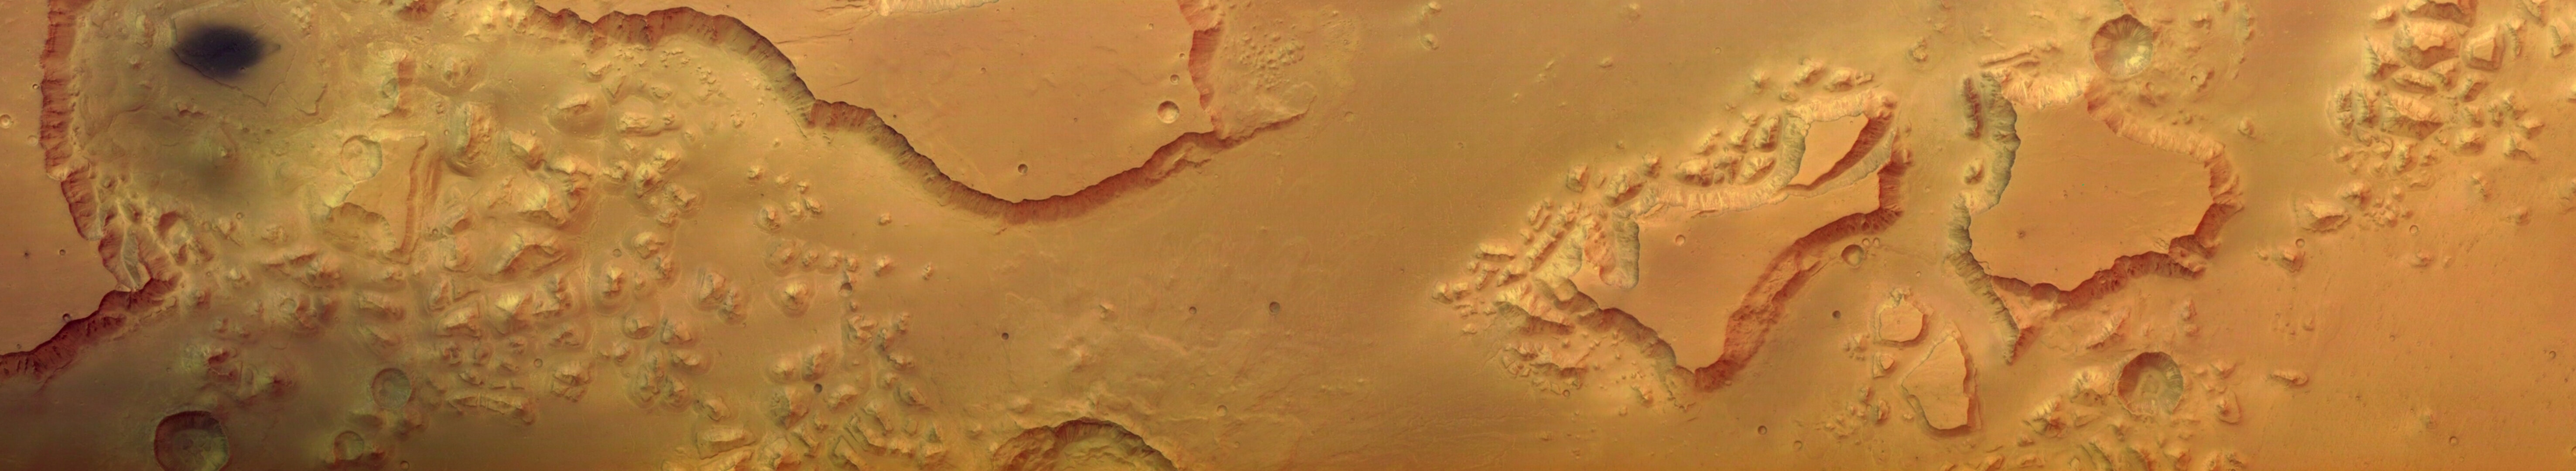 Full colour image of Valles Marineris taken by Mars Express HRSC